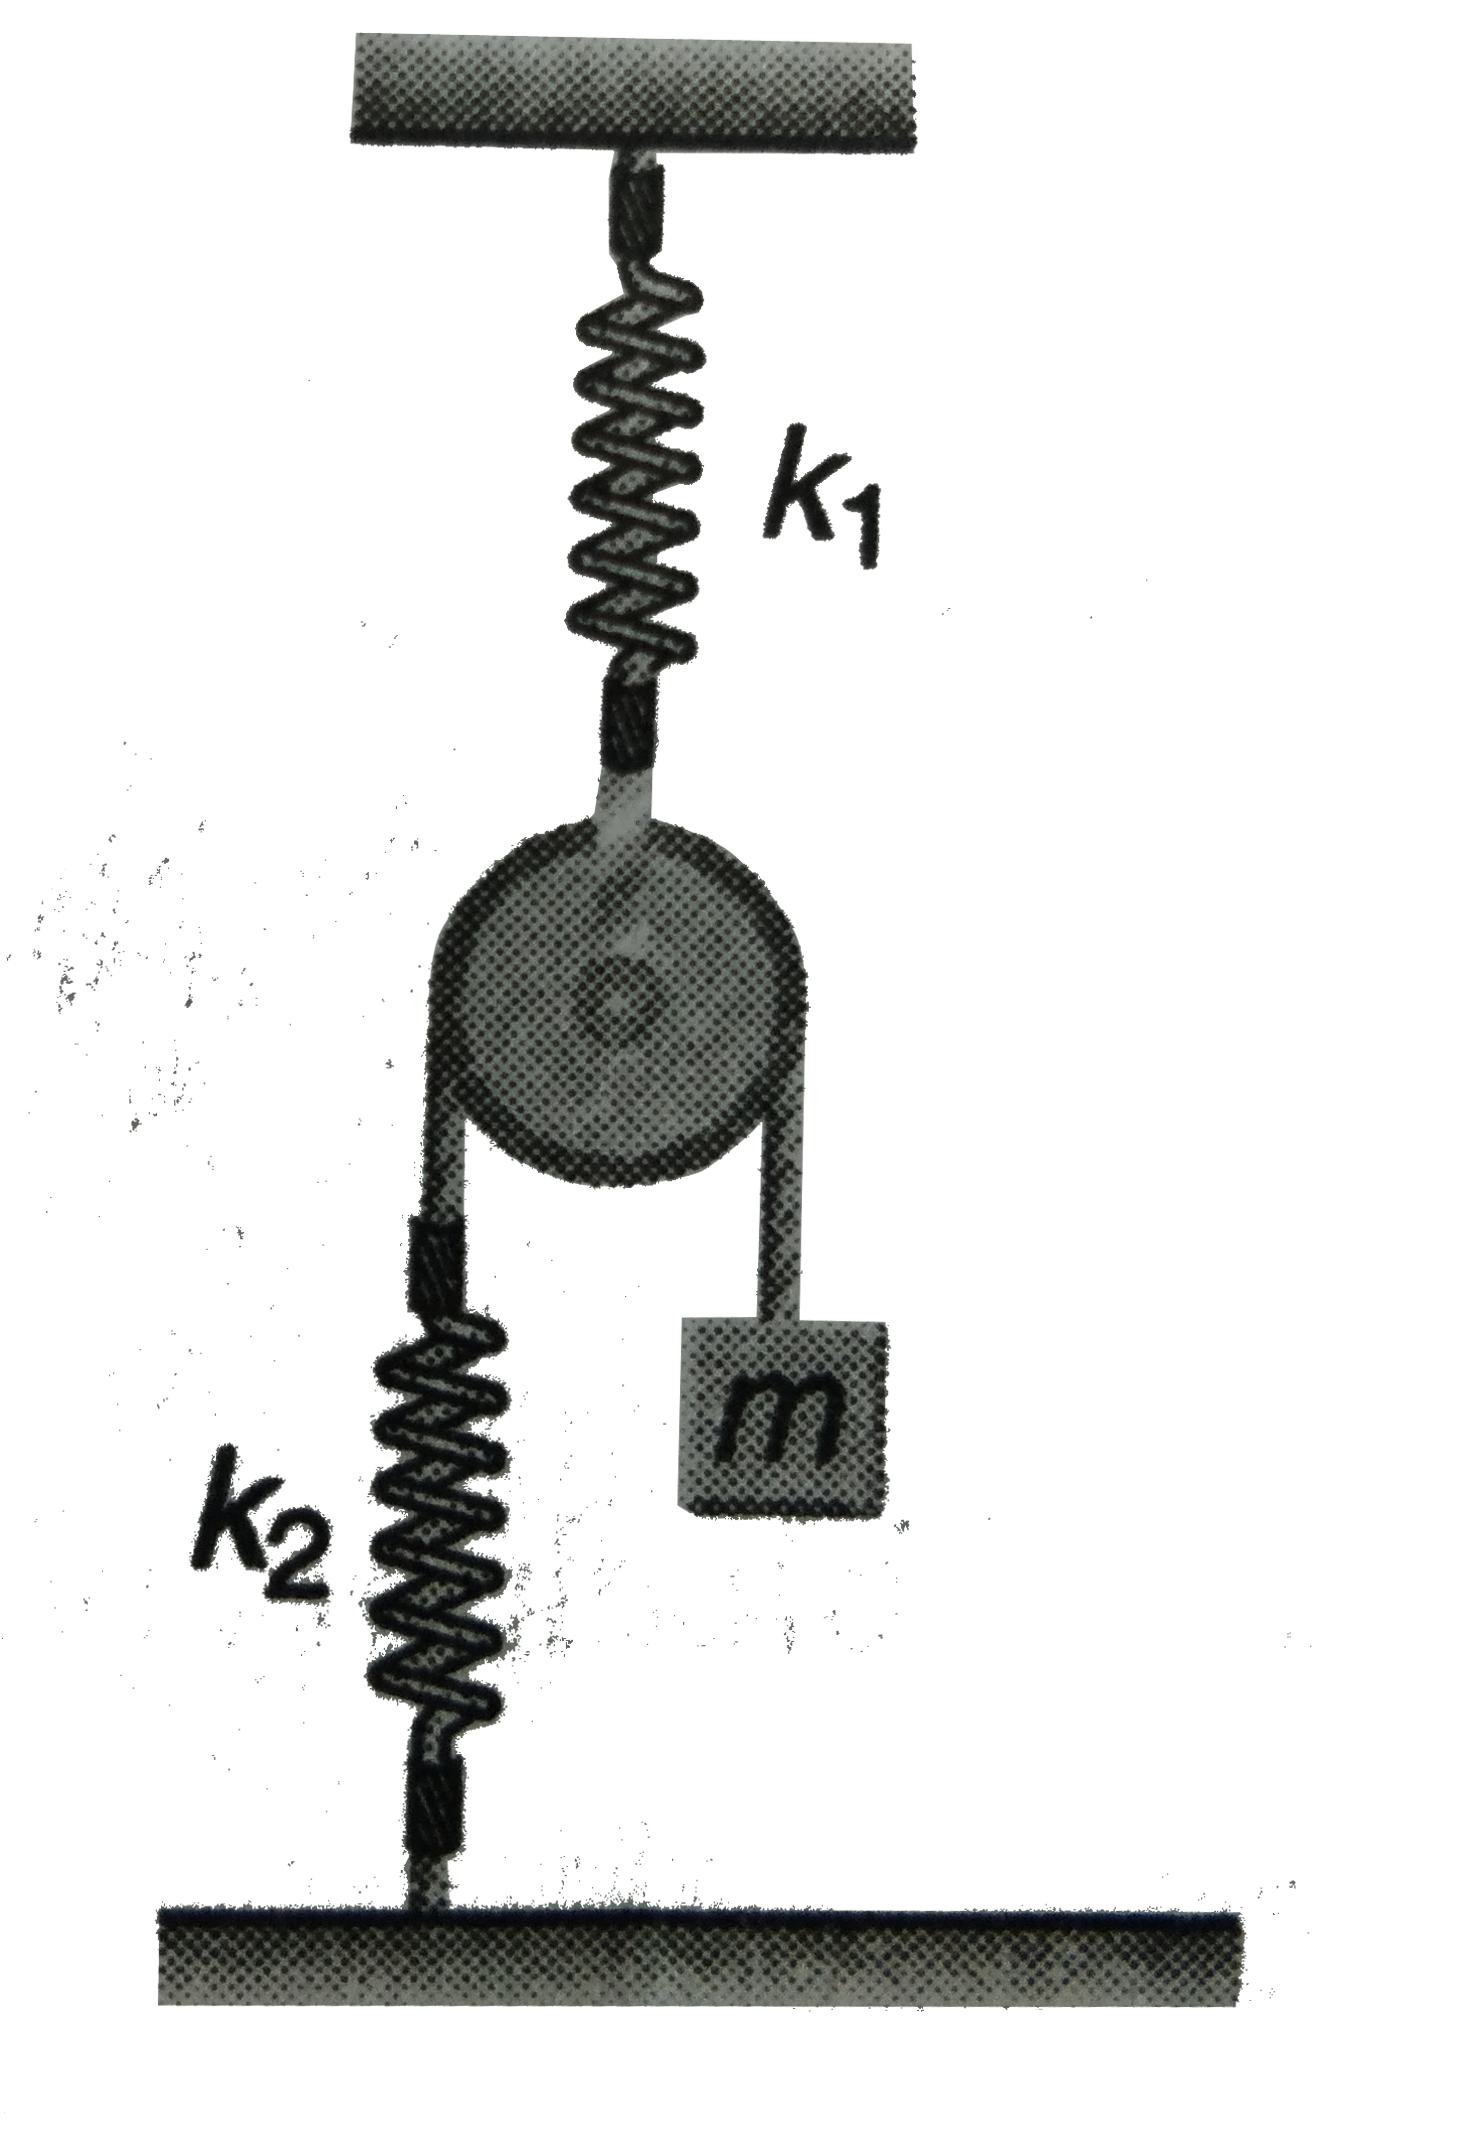 A light pulley is suspended at the lower end of a spring of constant k(1), as shown in figure. An inextensible string passes over the pulley. At one end of string a mass m is suspended, the other end of the string is attached to another spring of constant k(2). The other ends of both the springs are attached to rigid supports, as shown. Neglecting masses of springs and any friction, find the time period of small oscillations of mass m about equilibrium position.